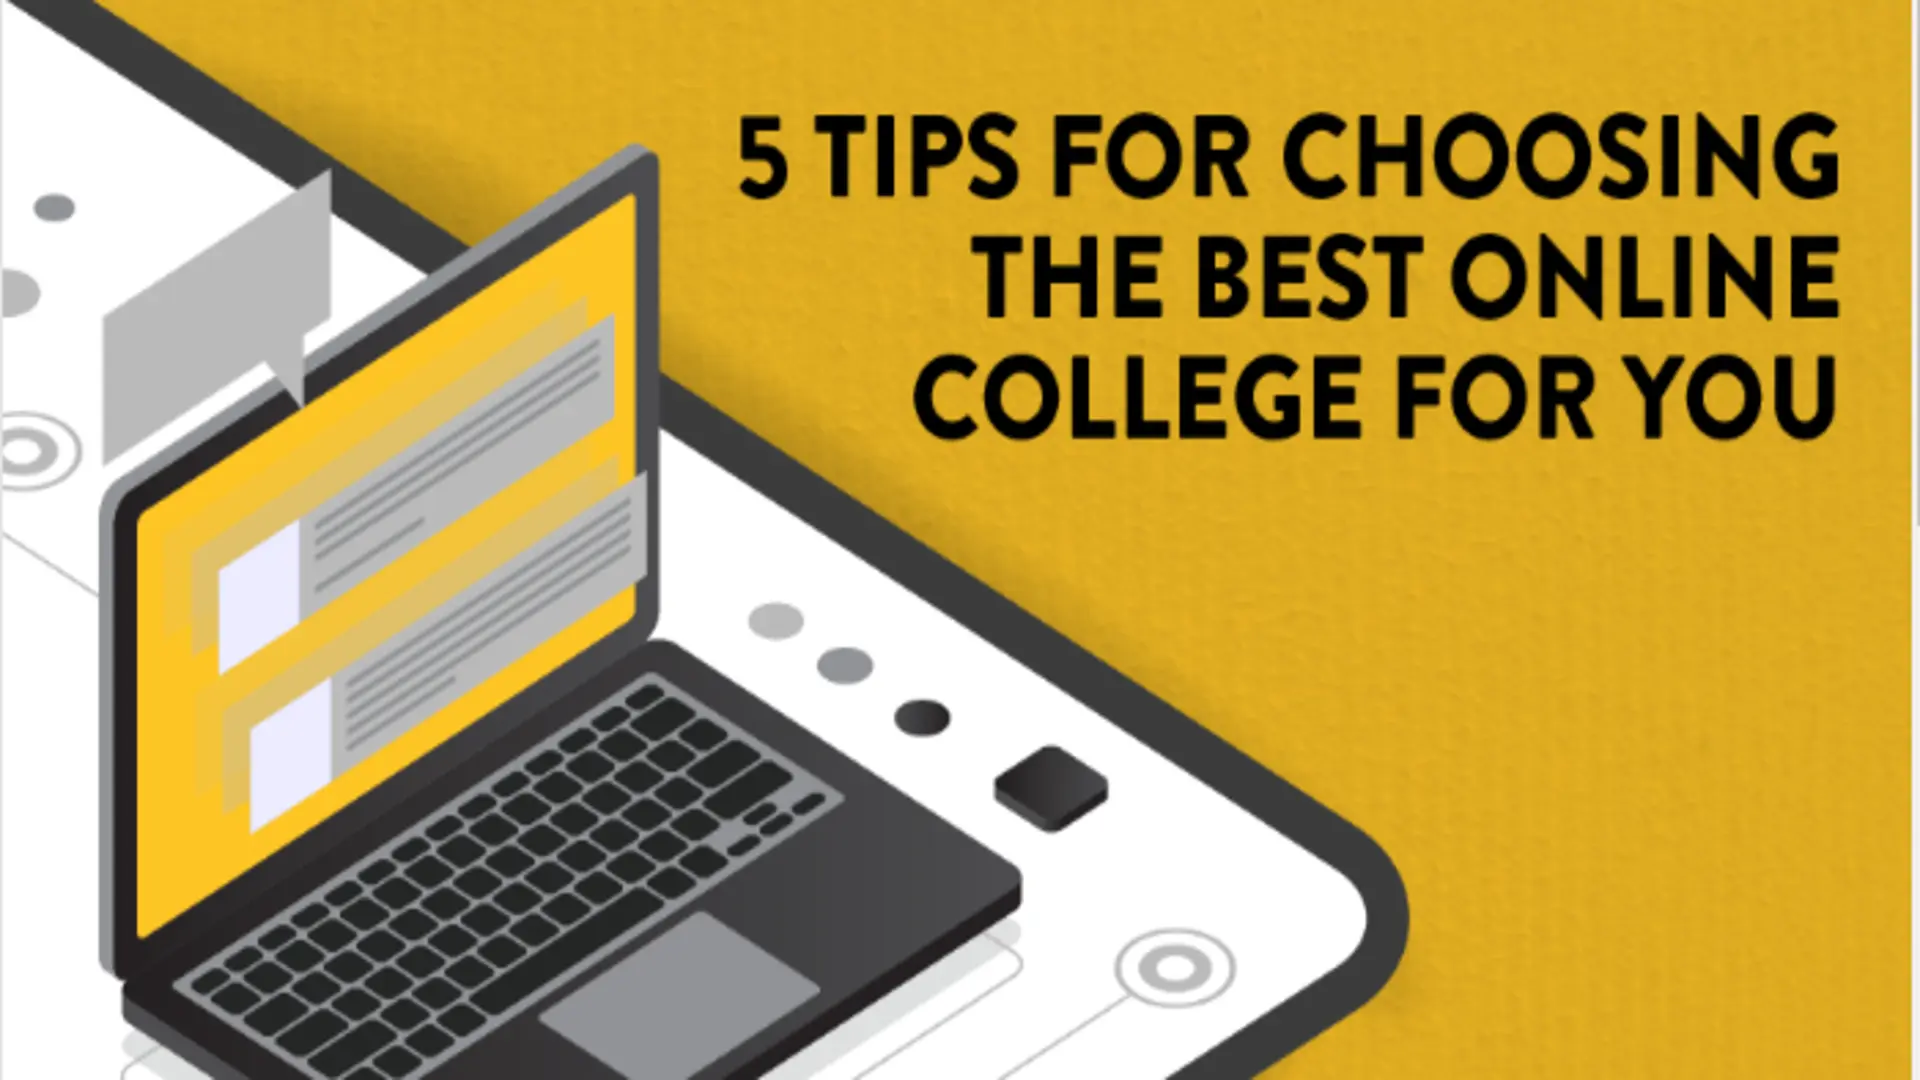 Choosing the Best Online College to Attend